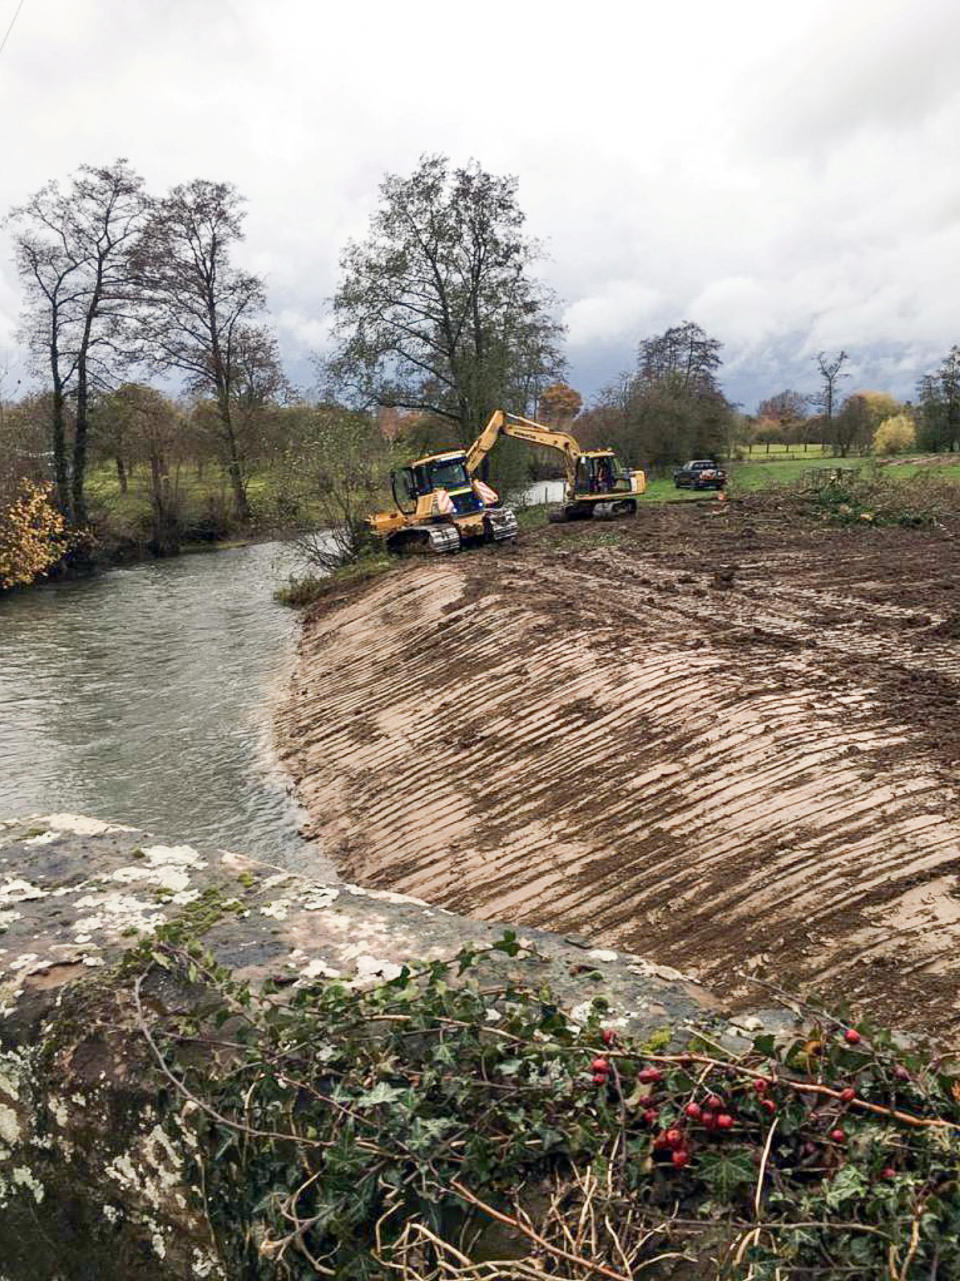 It's estimated that it could cost nearly £700,000 to restore the river and its banks after Price bulldozed and reprofiled it. (SWNS)